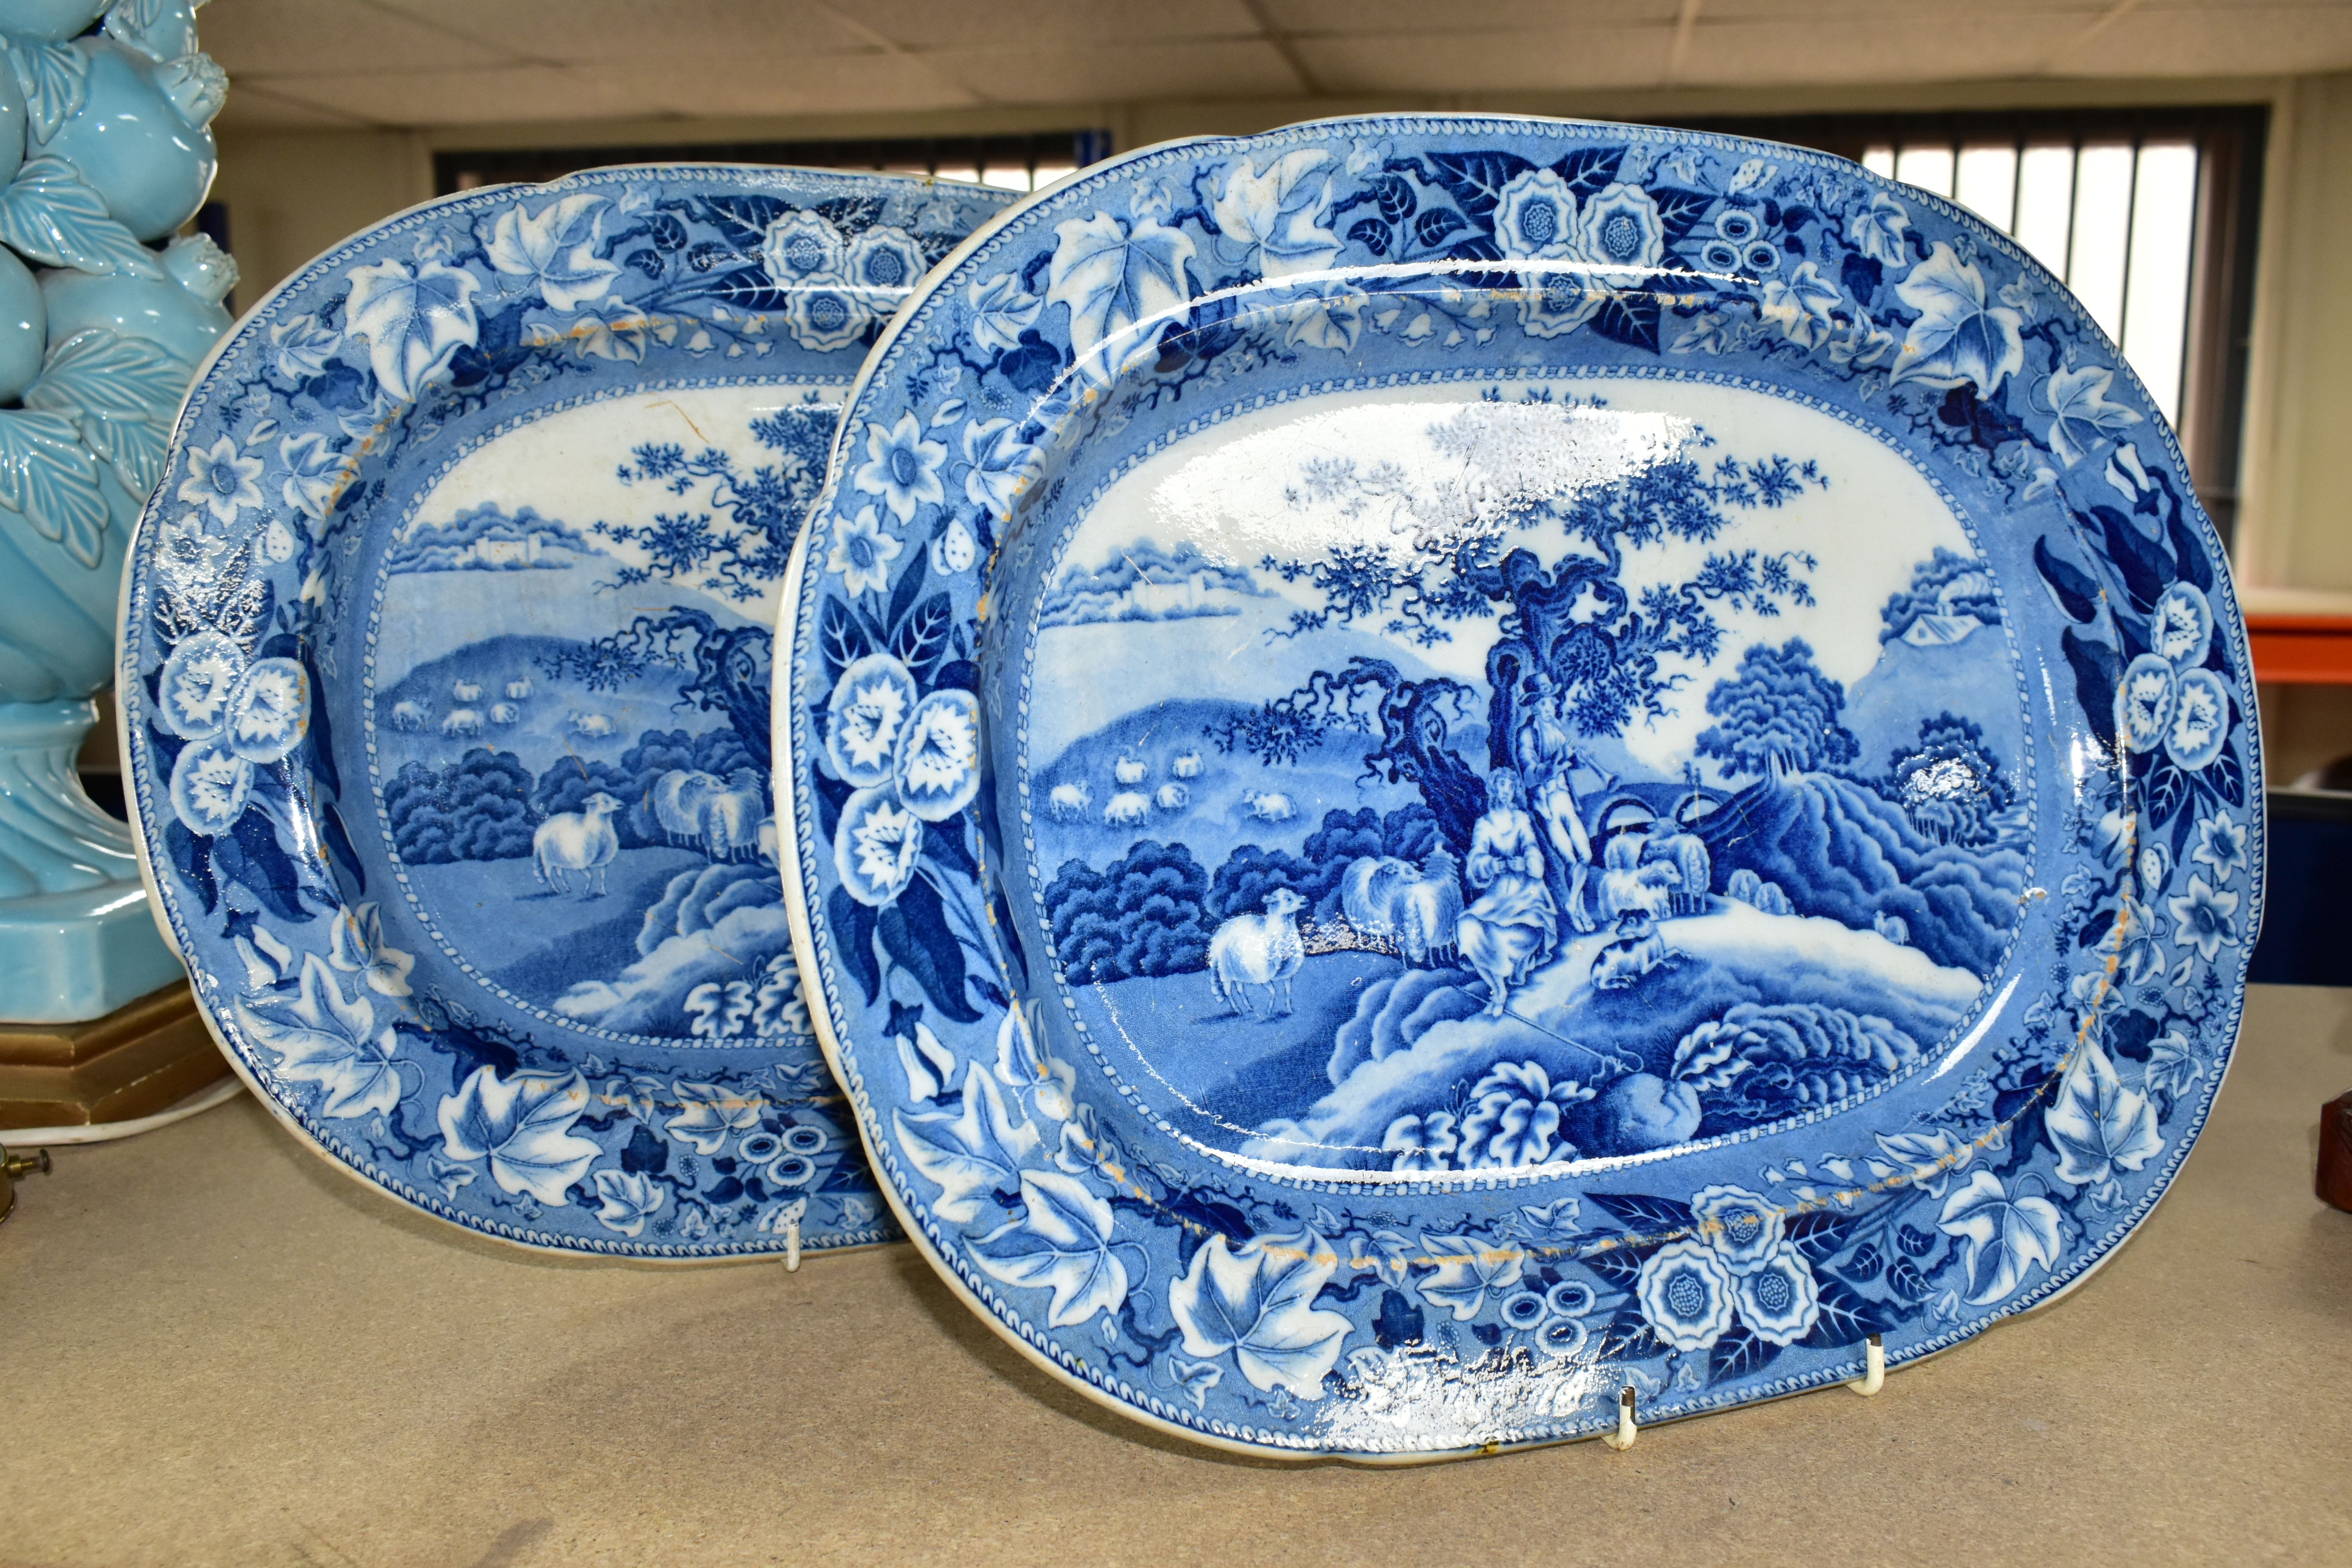 TWO 19TH CENTURY BLUE AND WHITE MEAT PLATES, both in a rectangular form, decorated with a resting